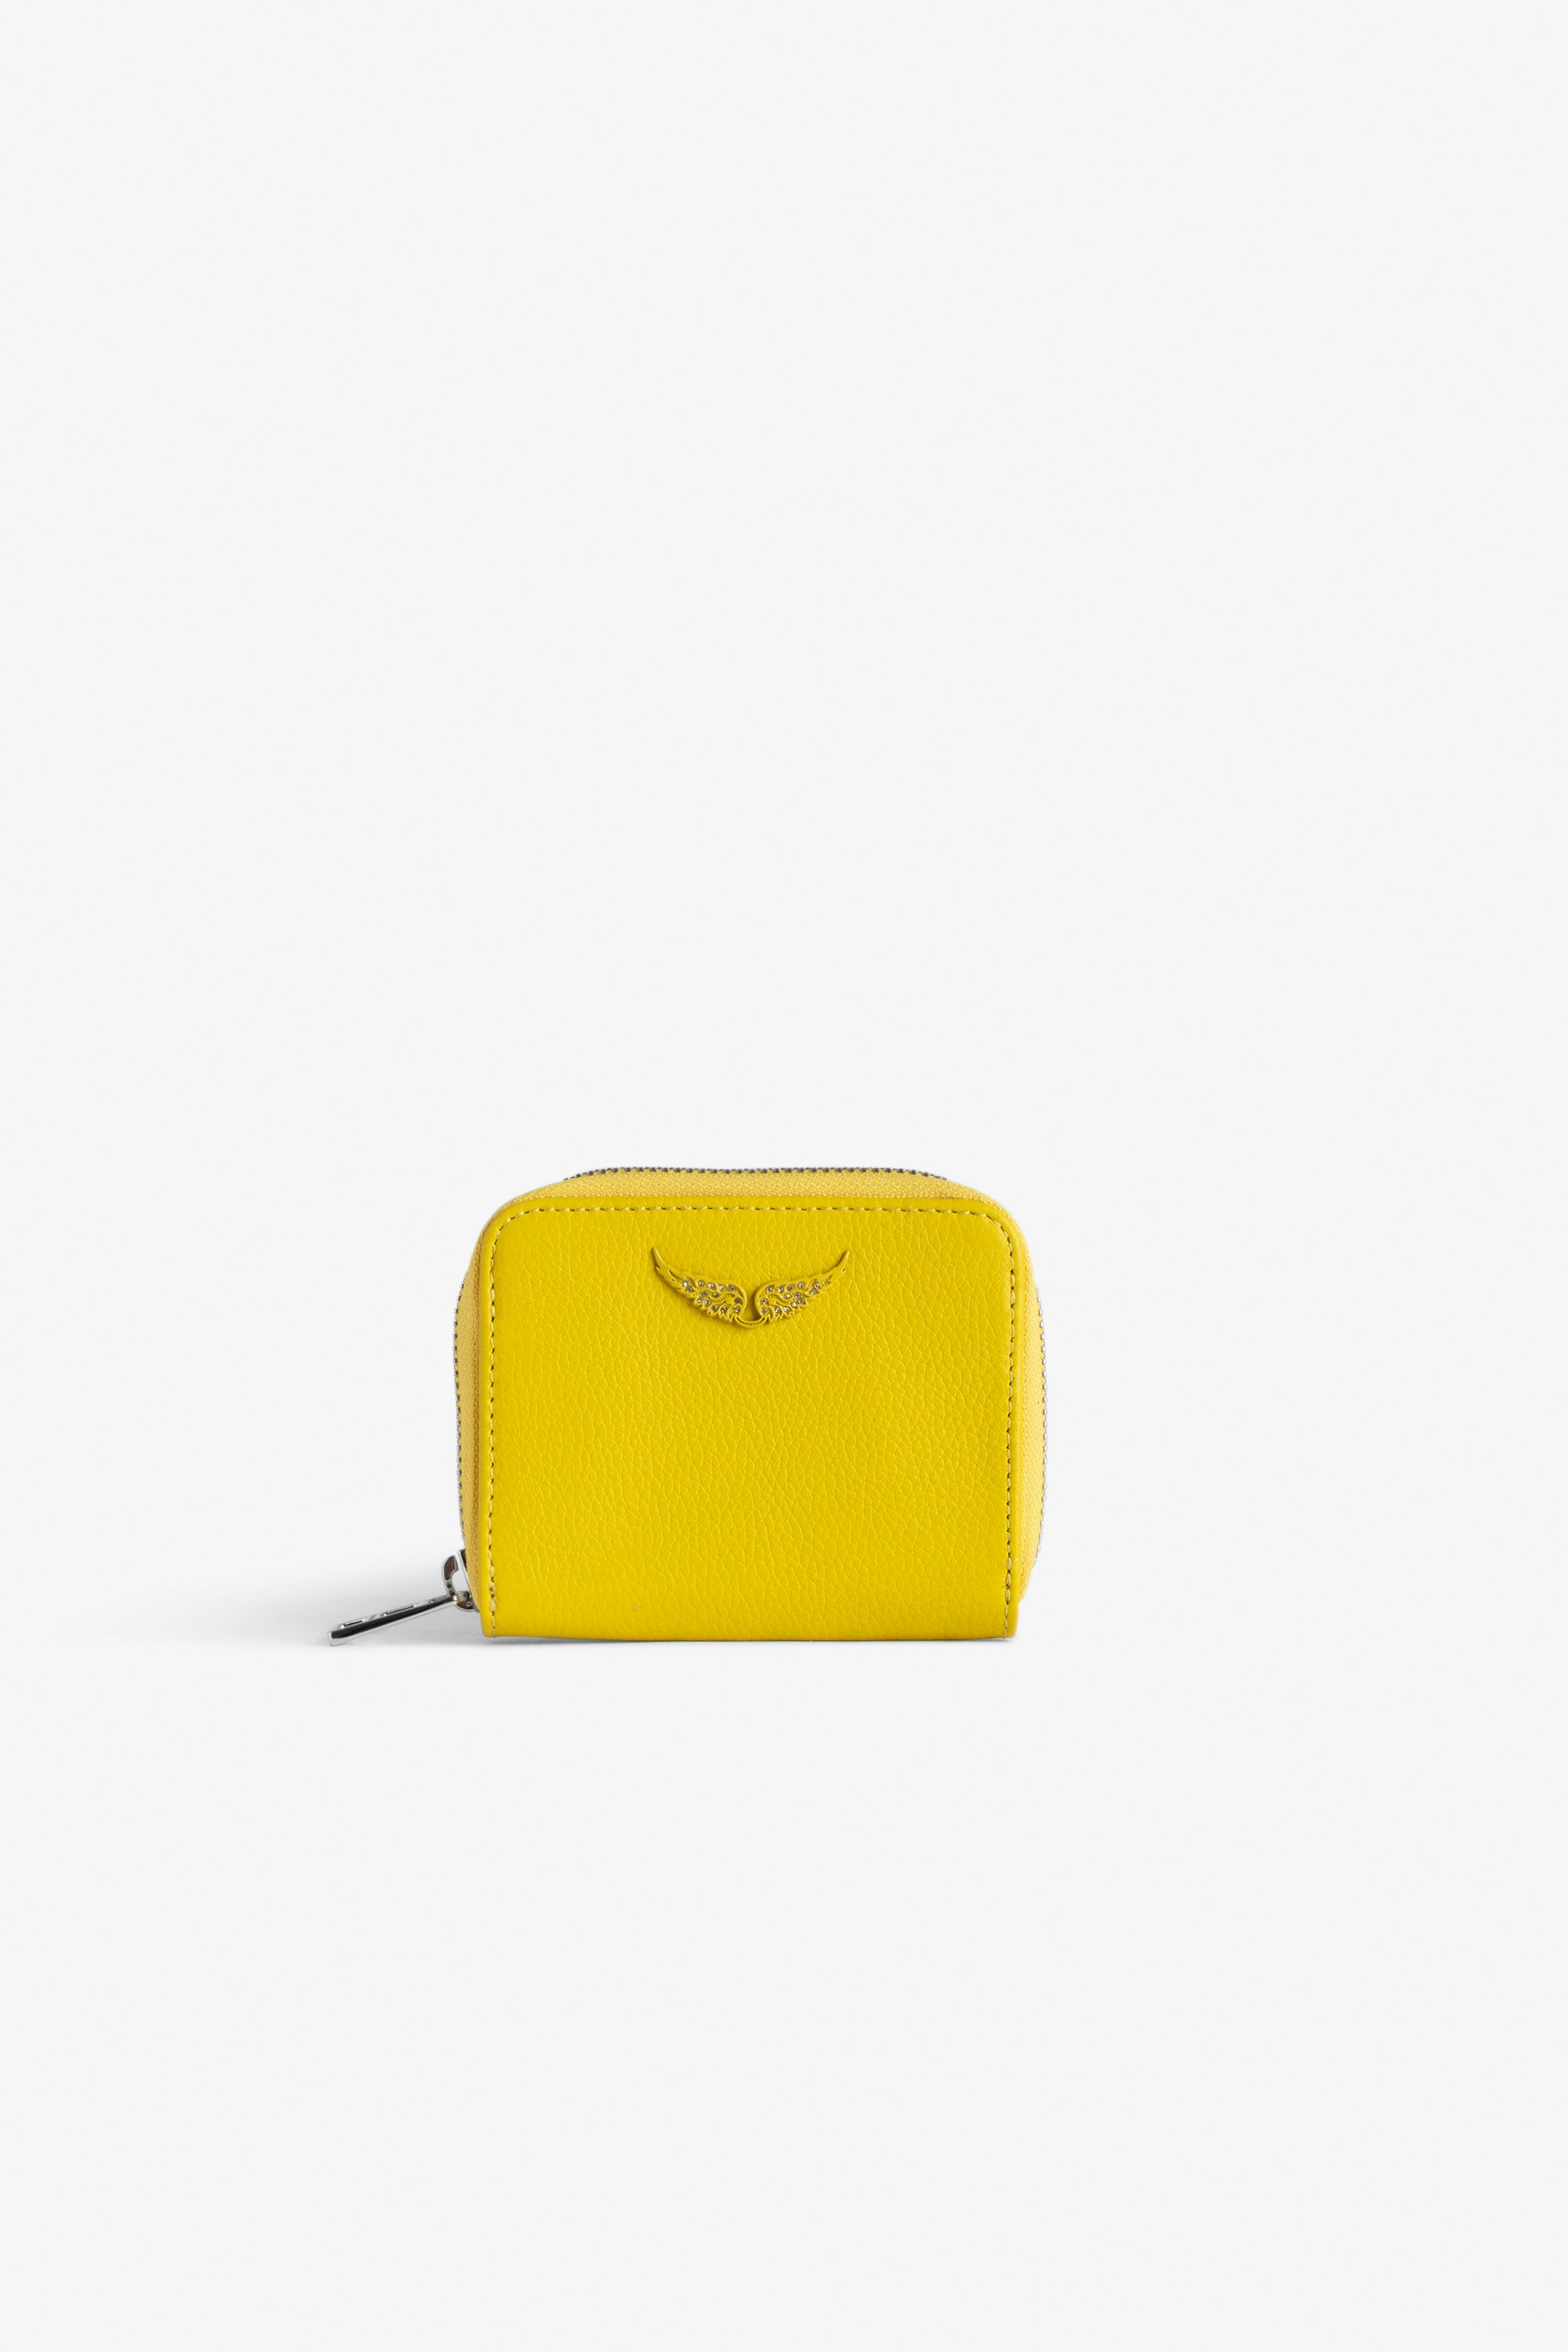 Mini ZV Coin 財布 Women’s yellow grained leather wallet with diamanté wings charm.